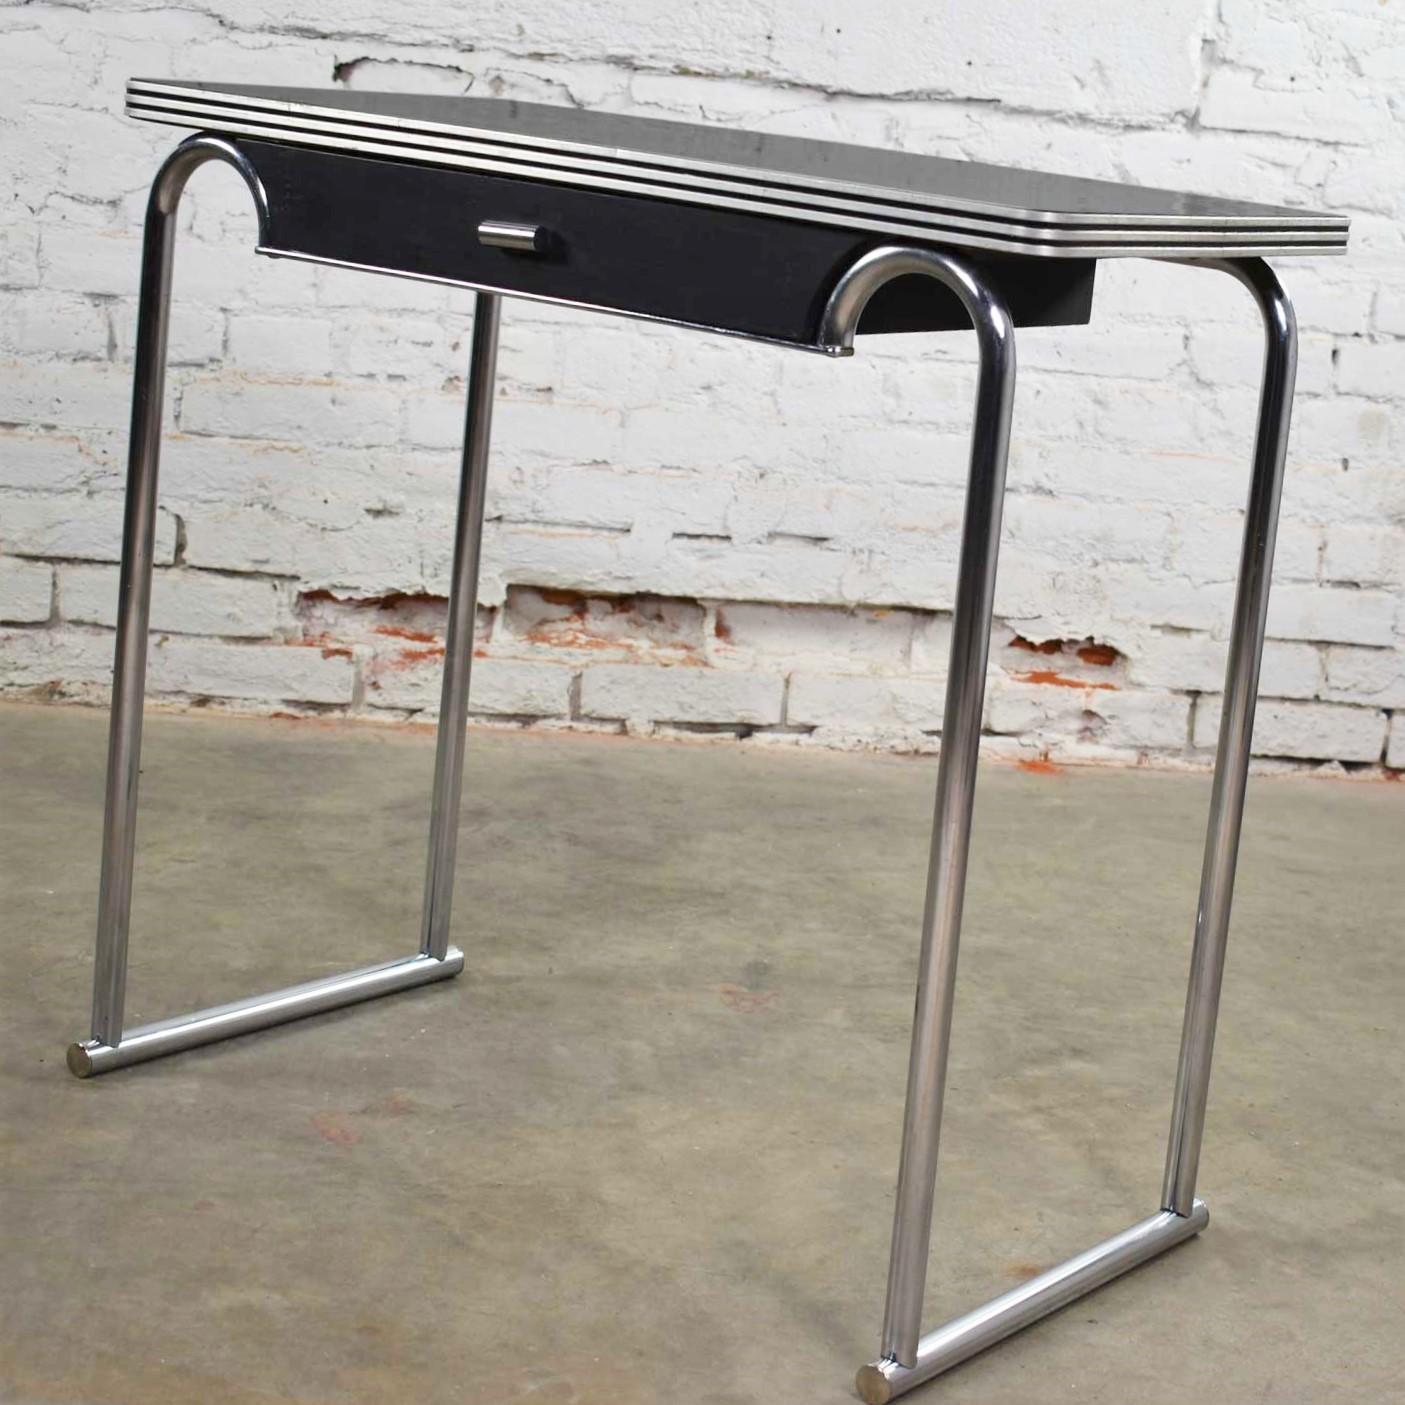 Fabulous Art Deco, Machine Age, Streamline Modern, Art Moderne, International style, Bauhaus console table in chrome, black painted wood and Bakelite (Catalin) or Cat-O-Lite top. This console table is attributed to Gilbert Rohde for Troy Sunshade.